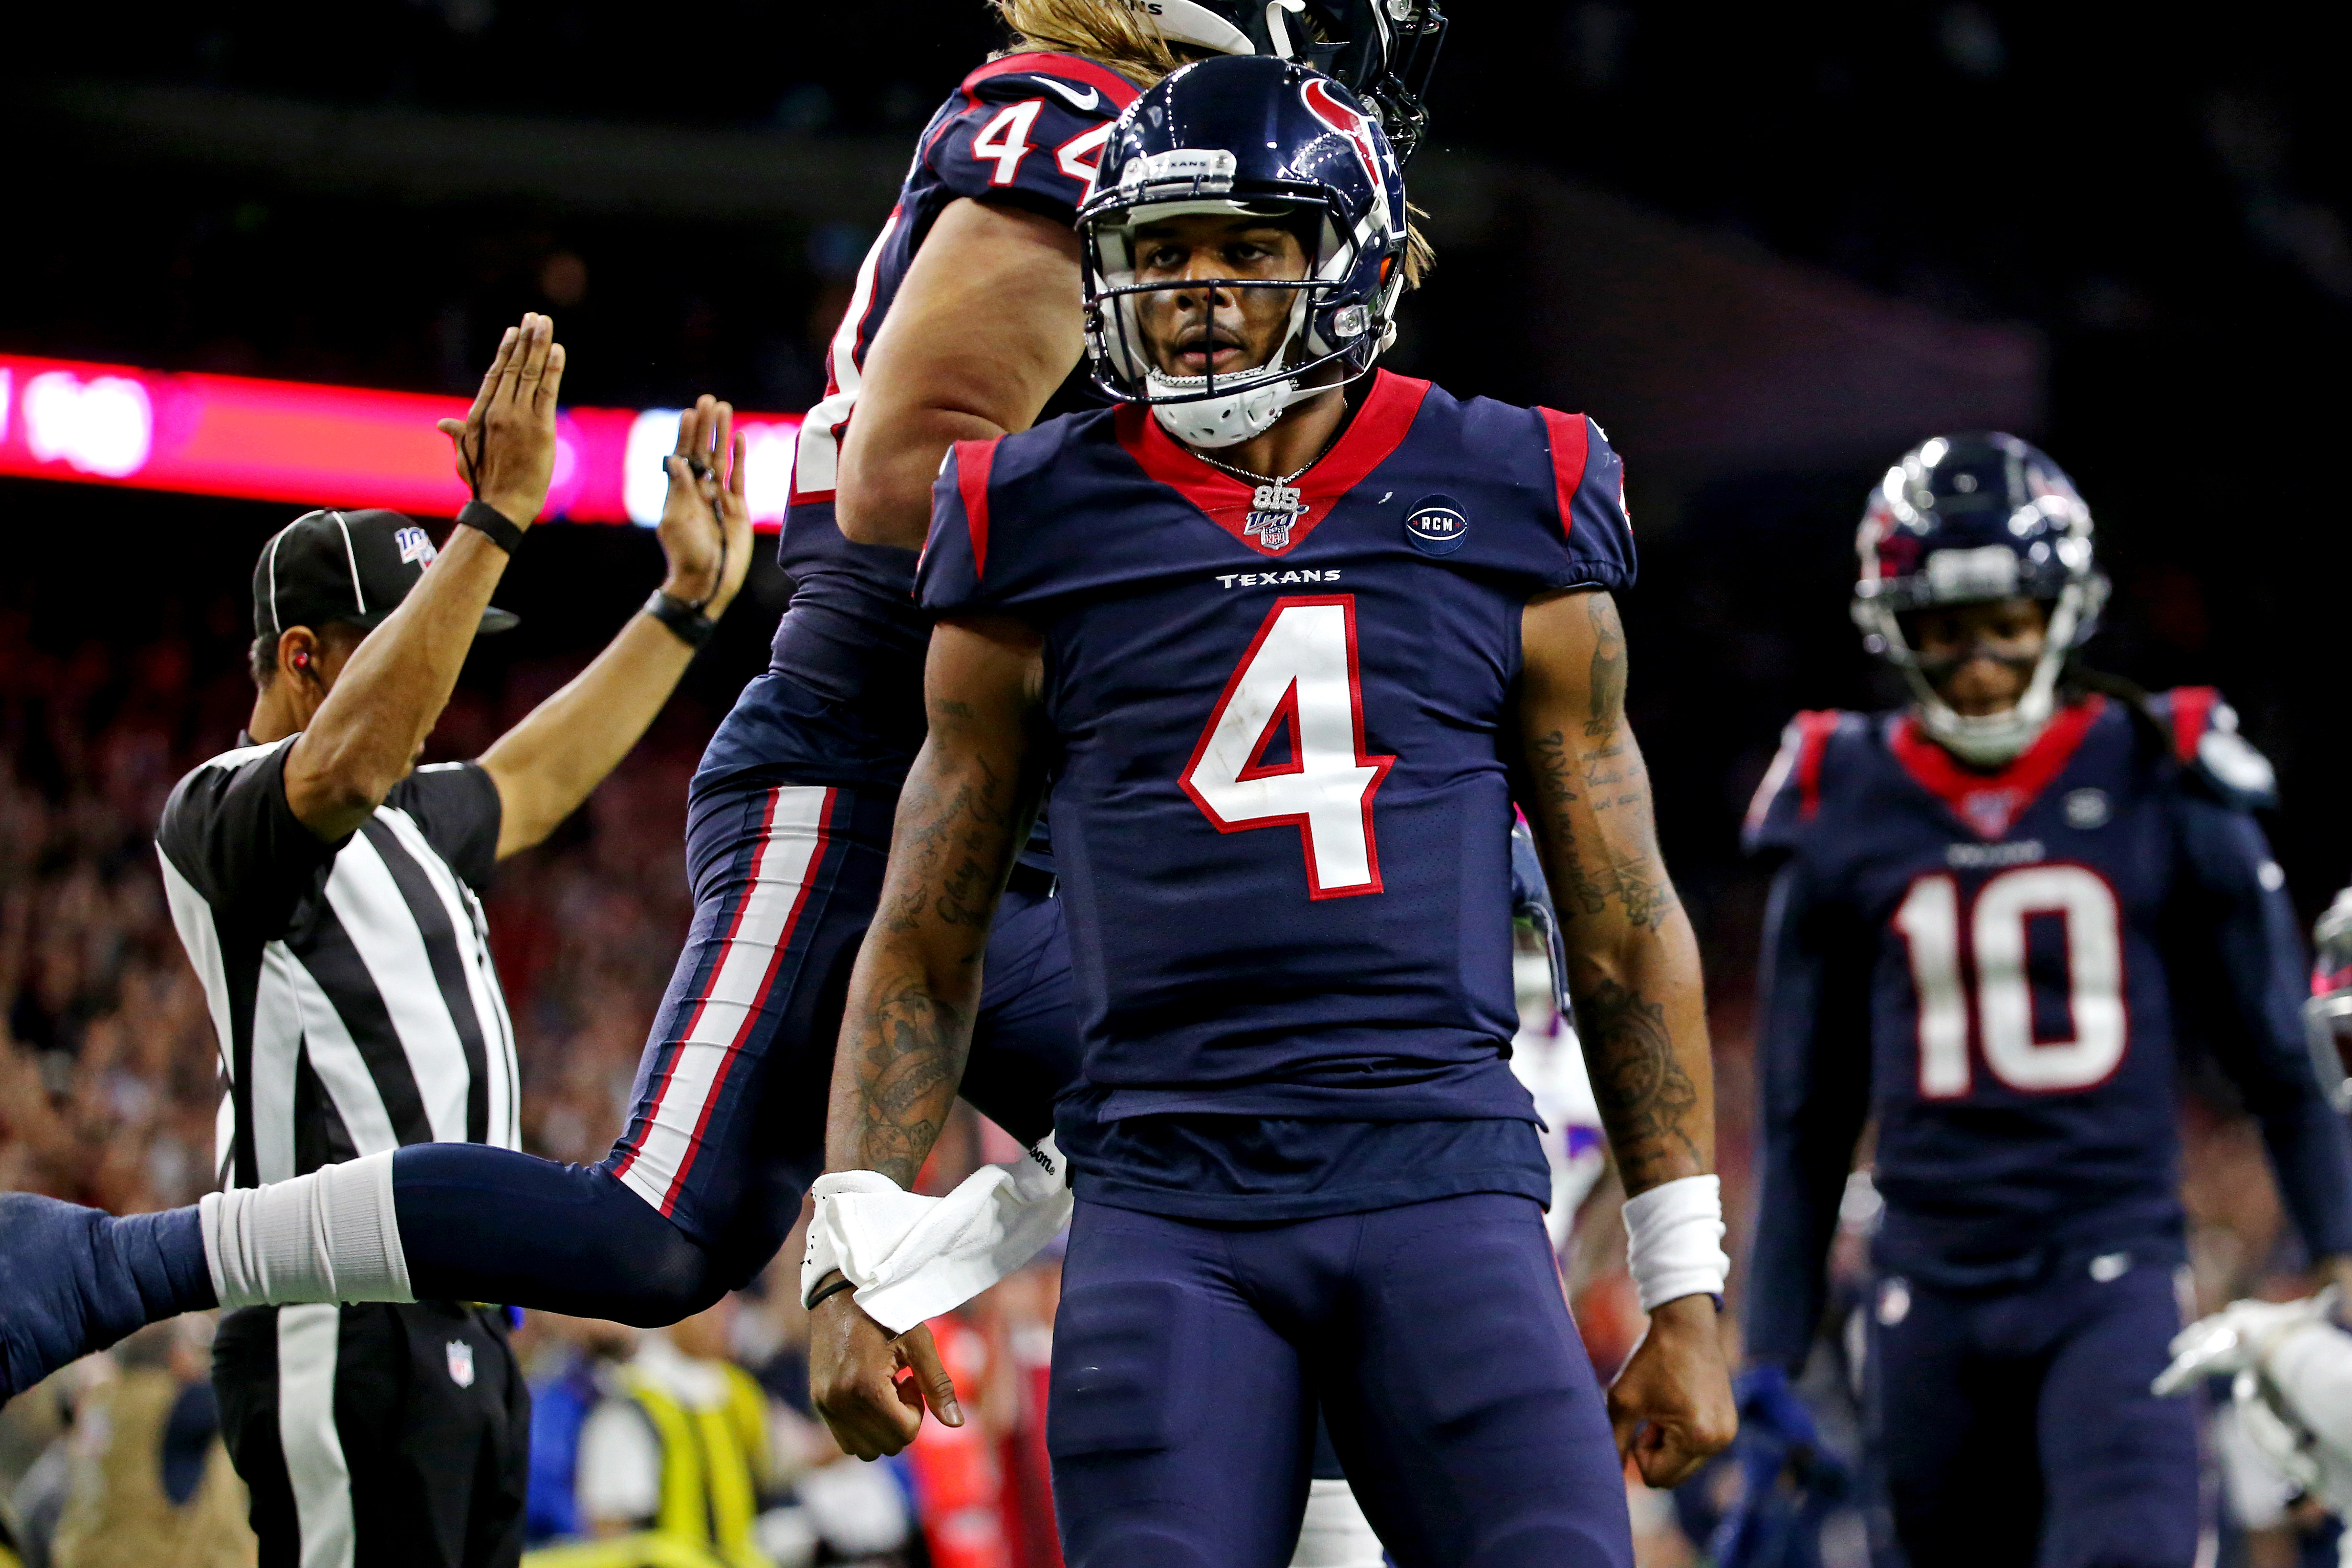 Houston Texans quarterback Deshaun Watson (4) celebrate after scoring a touchdown during the third quarter against the Buffalo Bills in the AFC Wild Card NFL Playoff game at NRG Stadium.